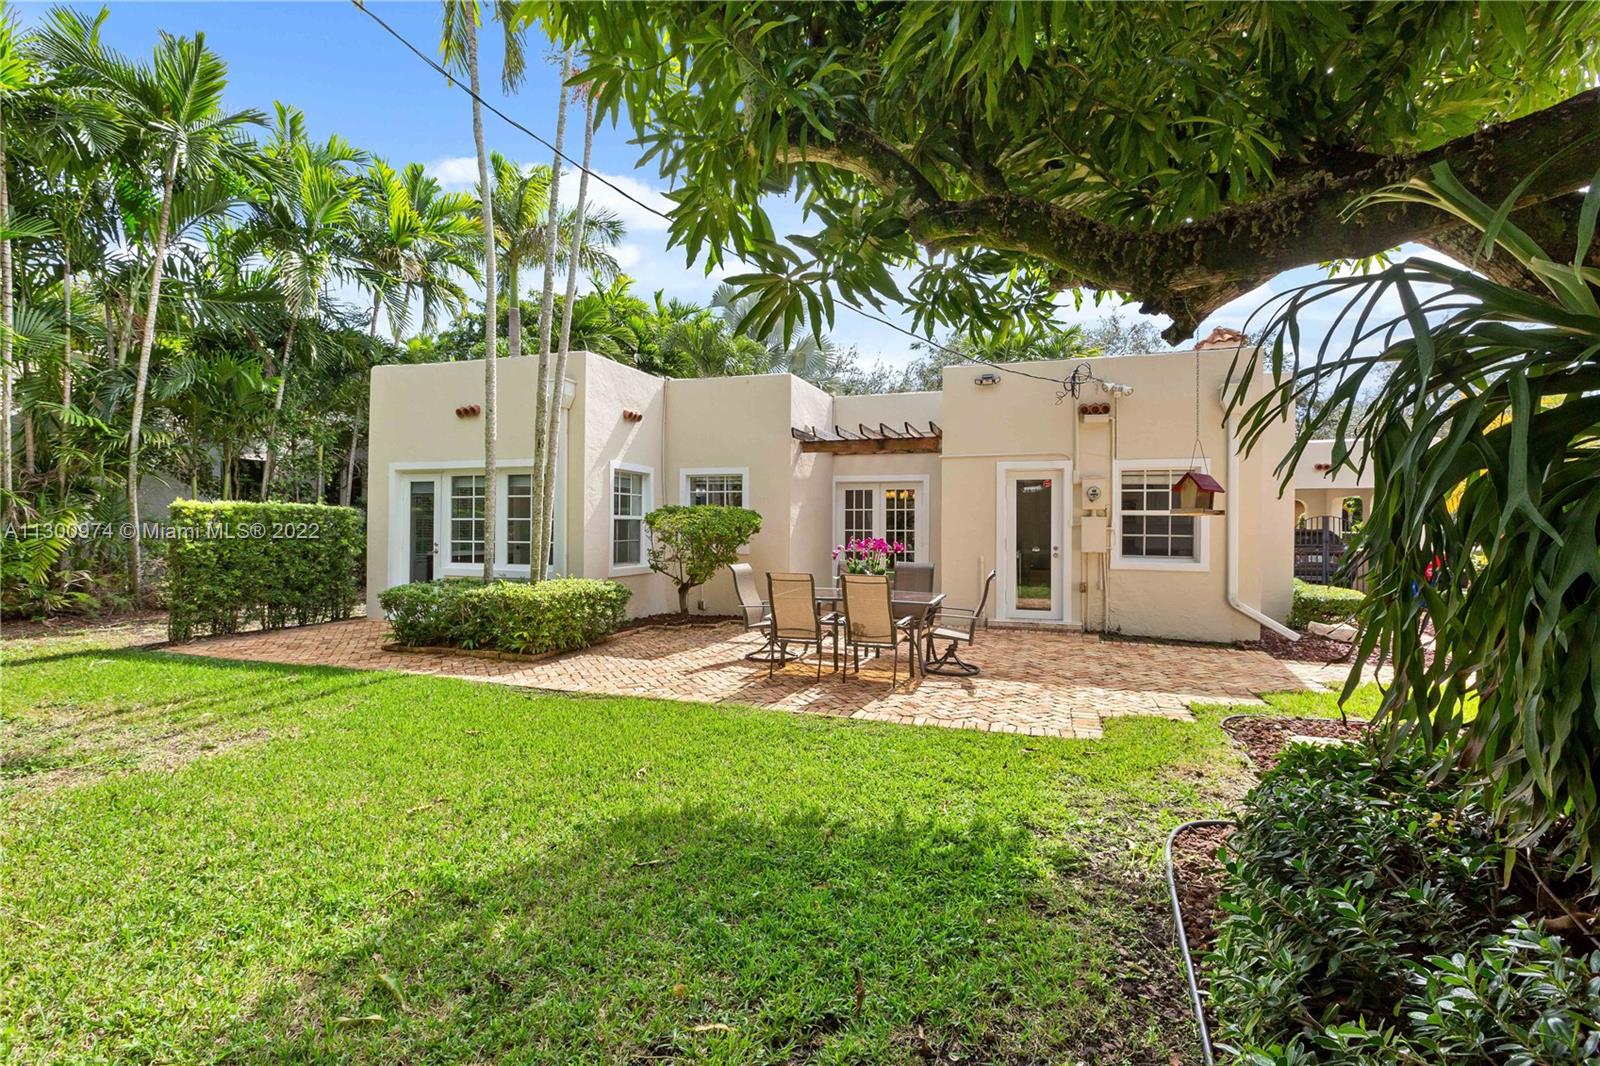 Charm and beauty reside on Alesio Avenue. Sunlight pours into this beautiful home, just blocks from all that downtown Coral Gables has to offer shopping, restaurants & culture. The property features a 3/2 main house with a detached 1/1 cottage. Great layout, fireplace, and arched transitions complement modern enhancements like new A/C, impact windows, and updated kitchen and bathrooms. It has room for a pool, has a large foyer and fruit trees. The updated kitchen has a built-in Breakfast nook with views of the yard.
The professionally landscaped yard includes a Chicago Brick patio, driveway, and carport. This Old Spanish charmer will have you at “Hello!”